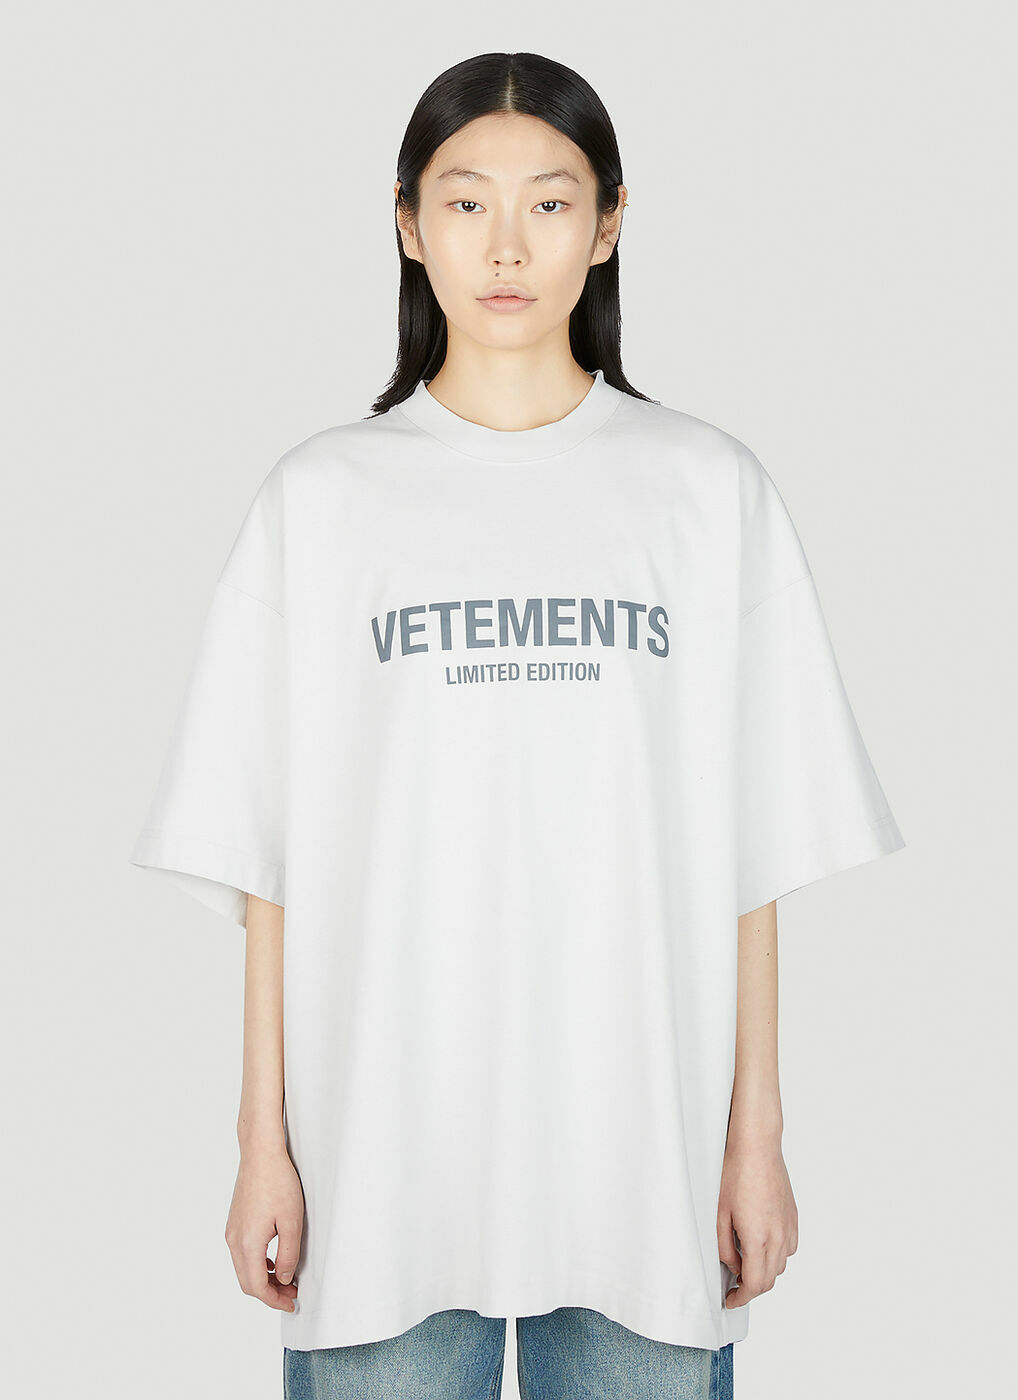 VETEMENTS - Logo Limited Edition T-Shirt in White Vetements